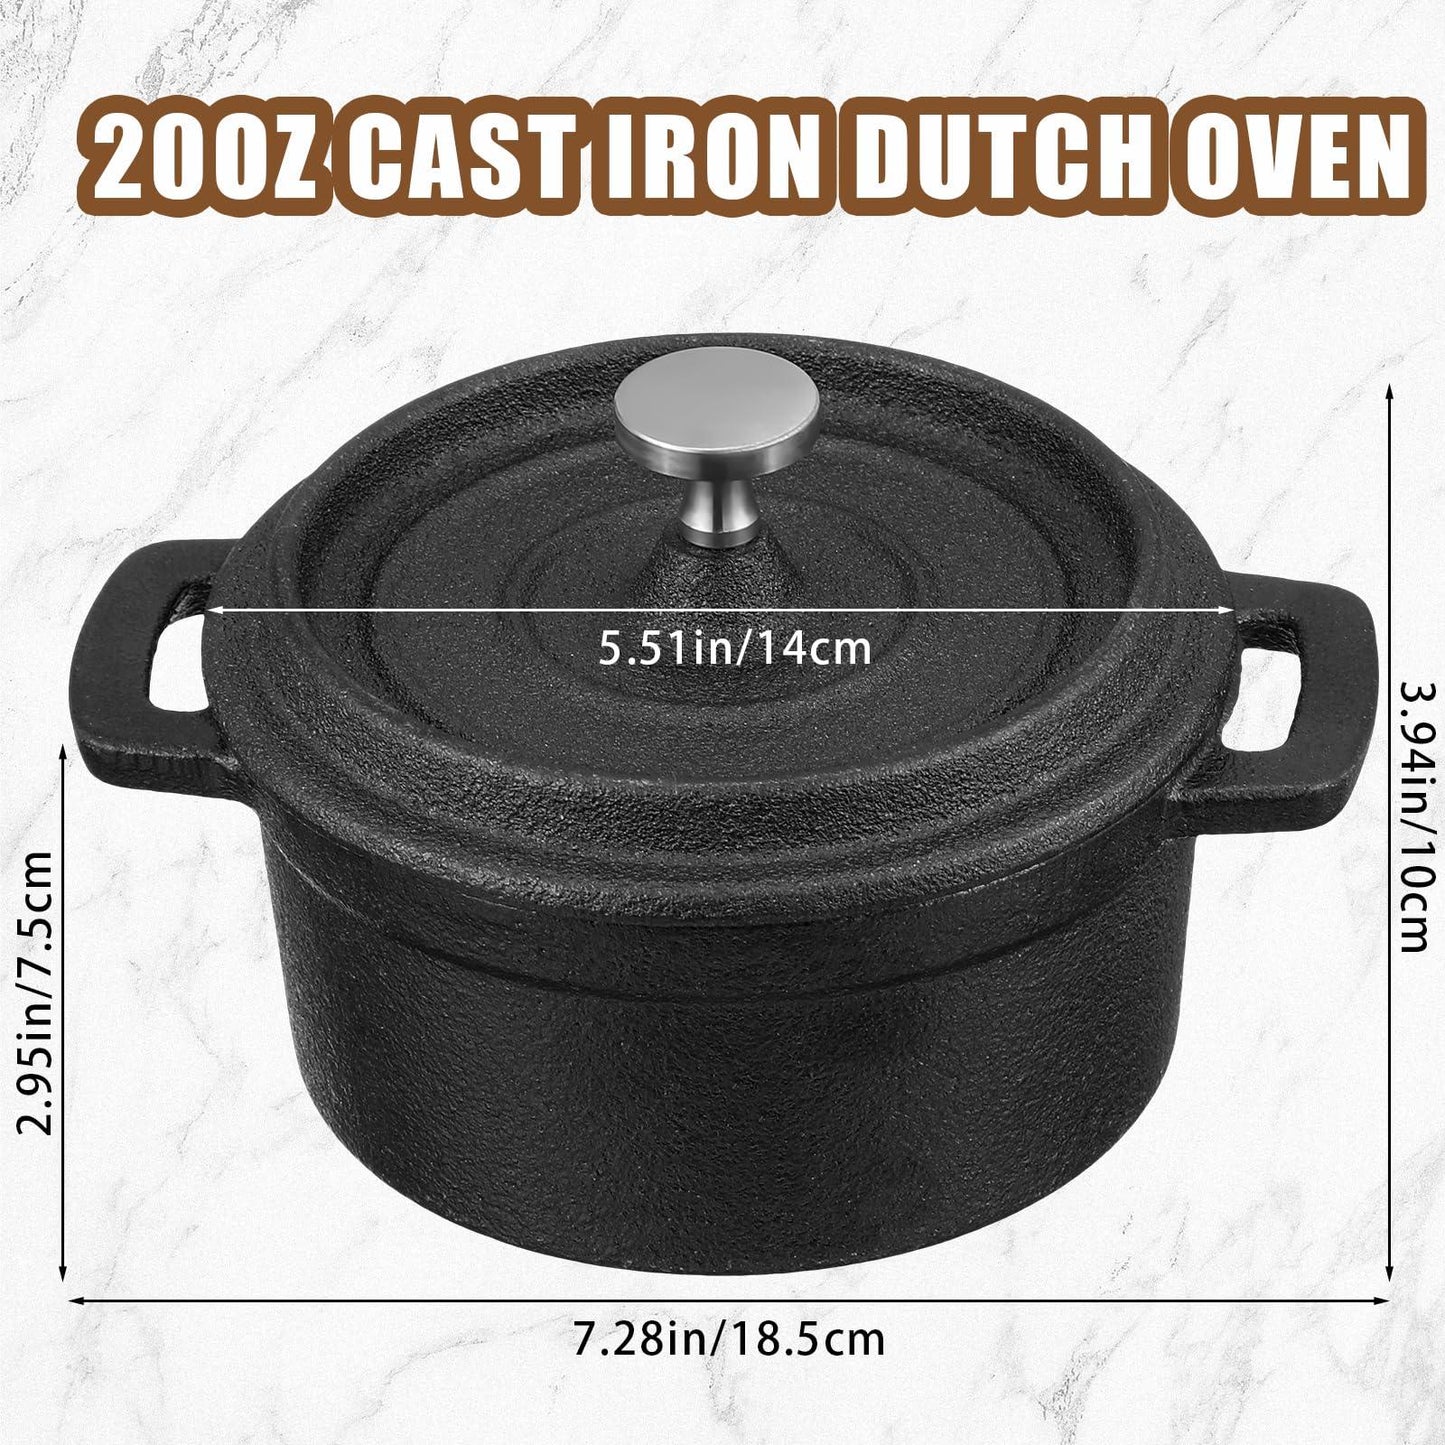 Suttmin 4 Pcs Mini Dutch Oven Small Round Iron Cocotte Black Dutch Oven Pot with Lid and Dual Handles Cast Iron Pot for Stovetop Use Marinate Cook Bake Refrigerate Garlic Roaster BBQ Grill (20 oz) - CookCave